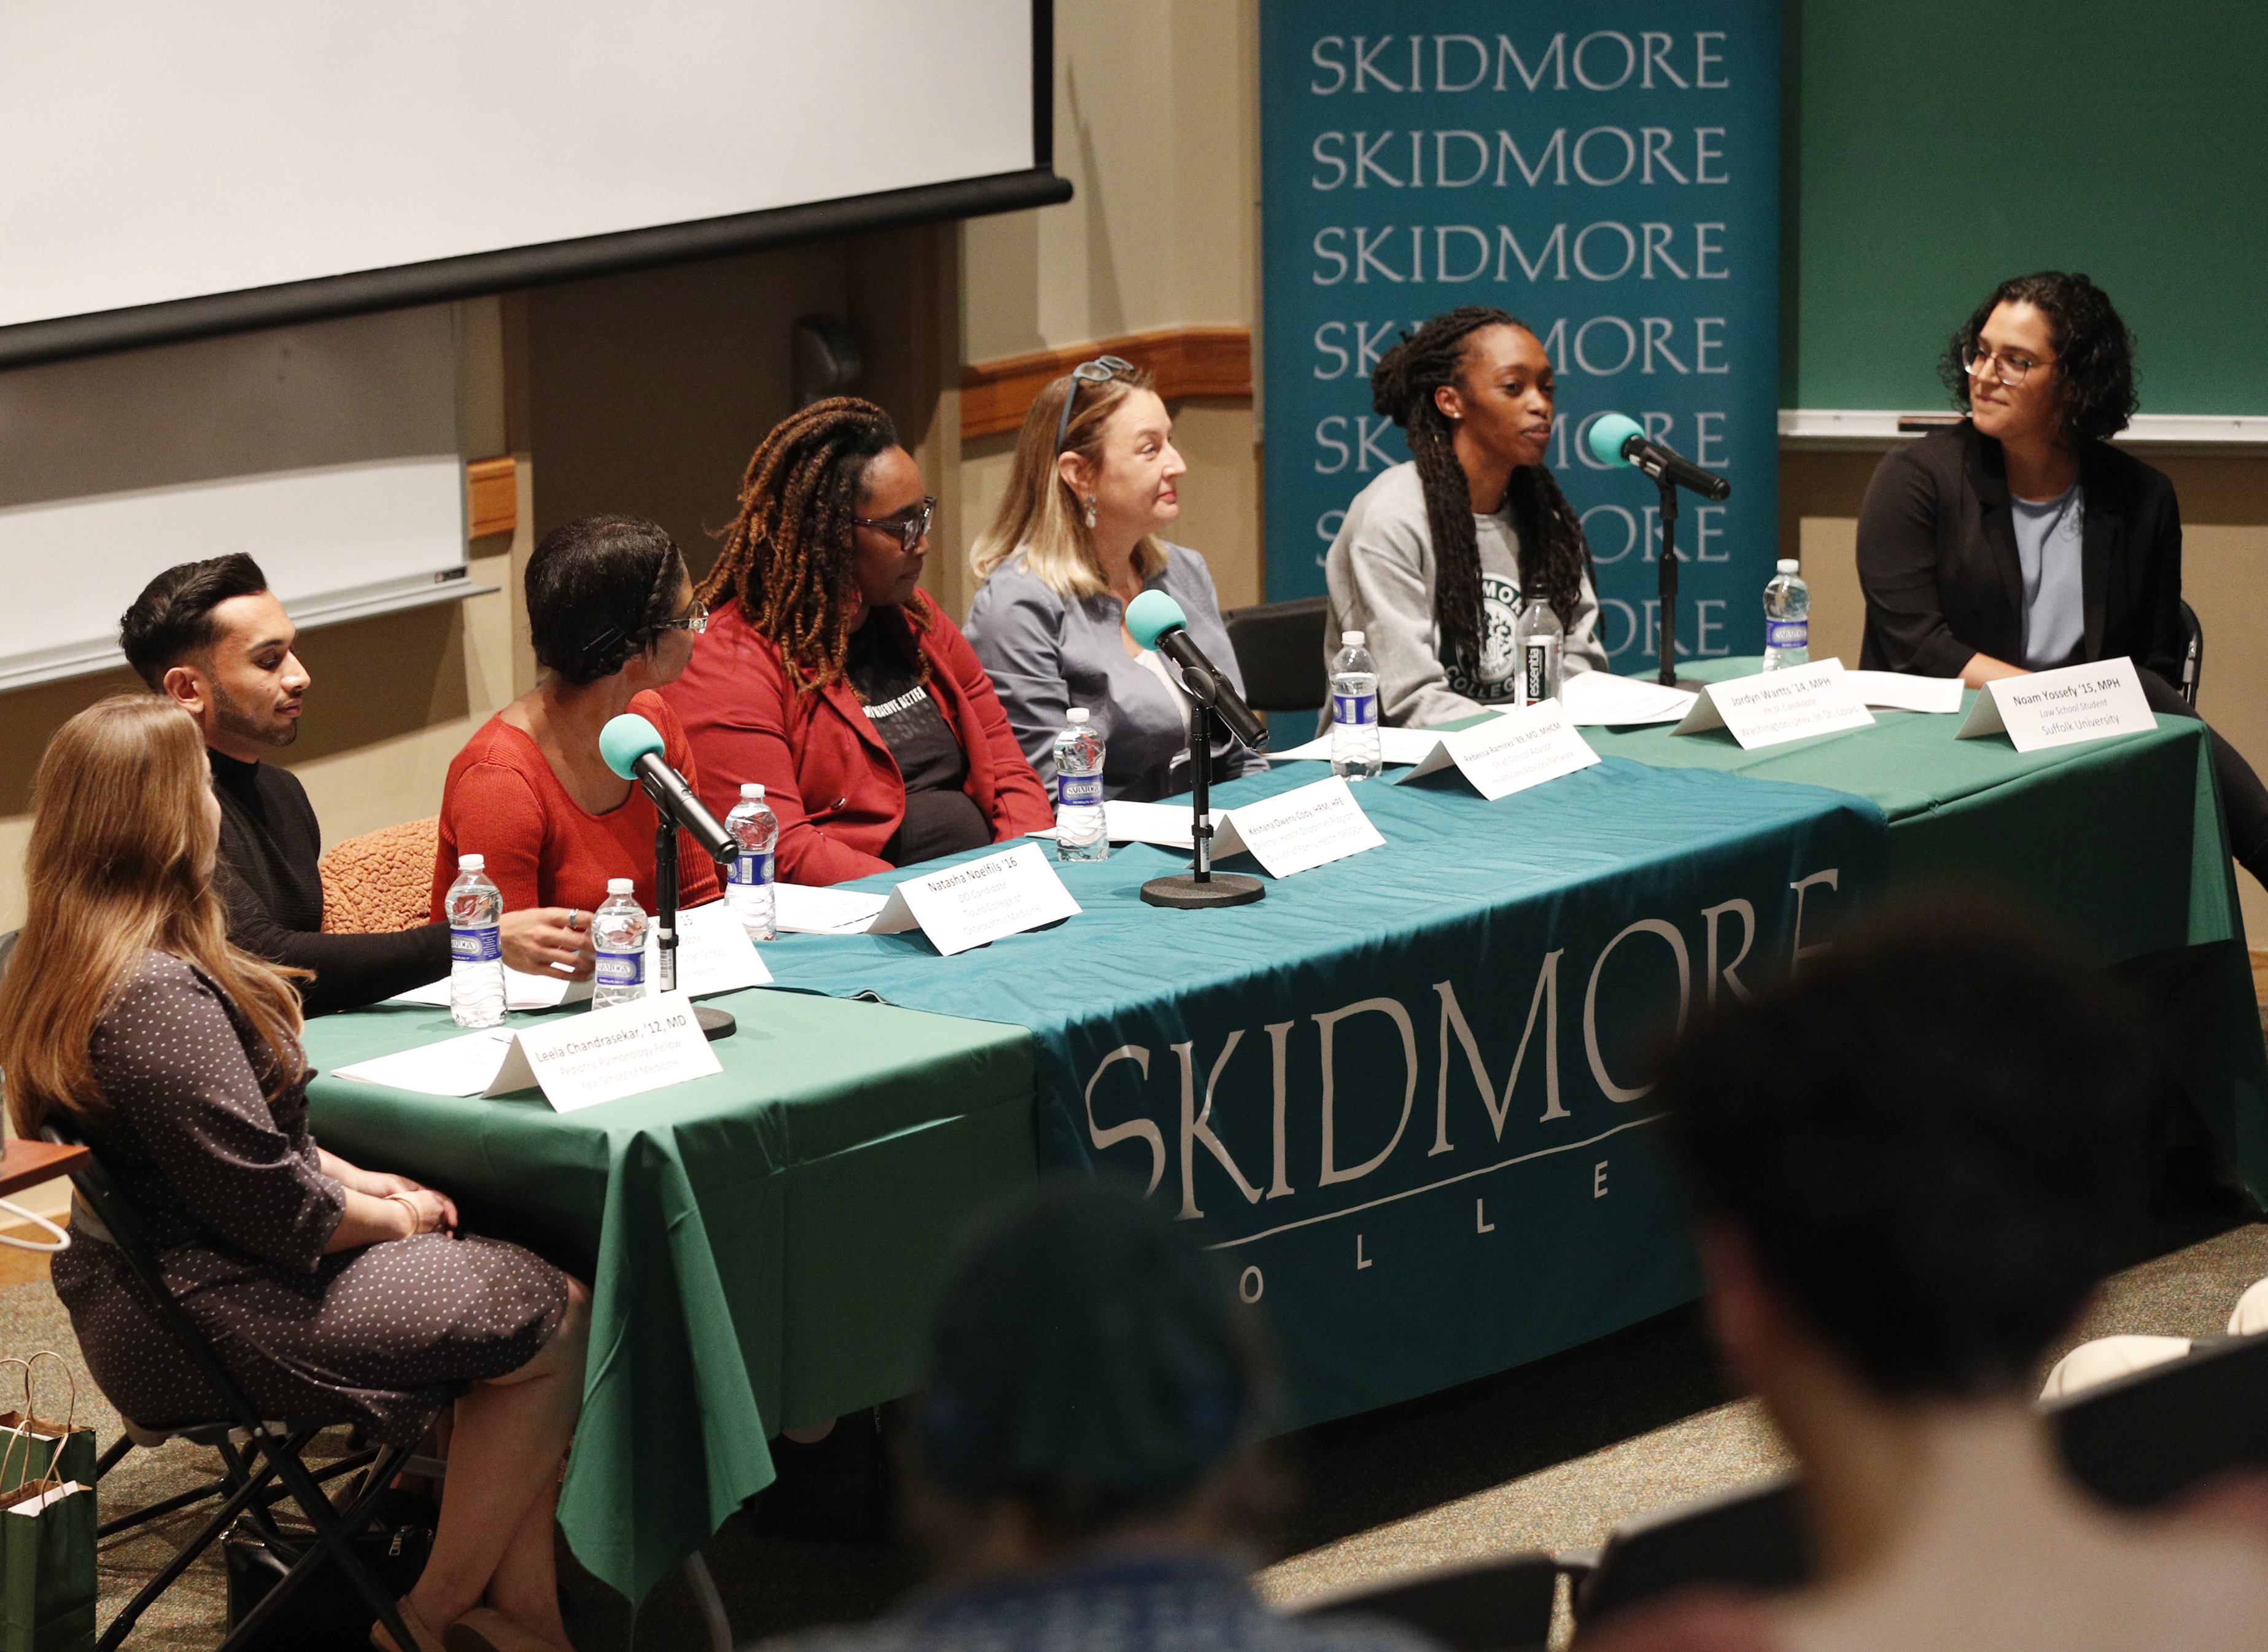 Alumni panelists discuss “Disparities in Healthcare” as part of an It It 7 discussion on Thursday, Sept. 29, as part of the In It 7 series.   